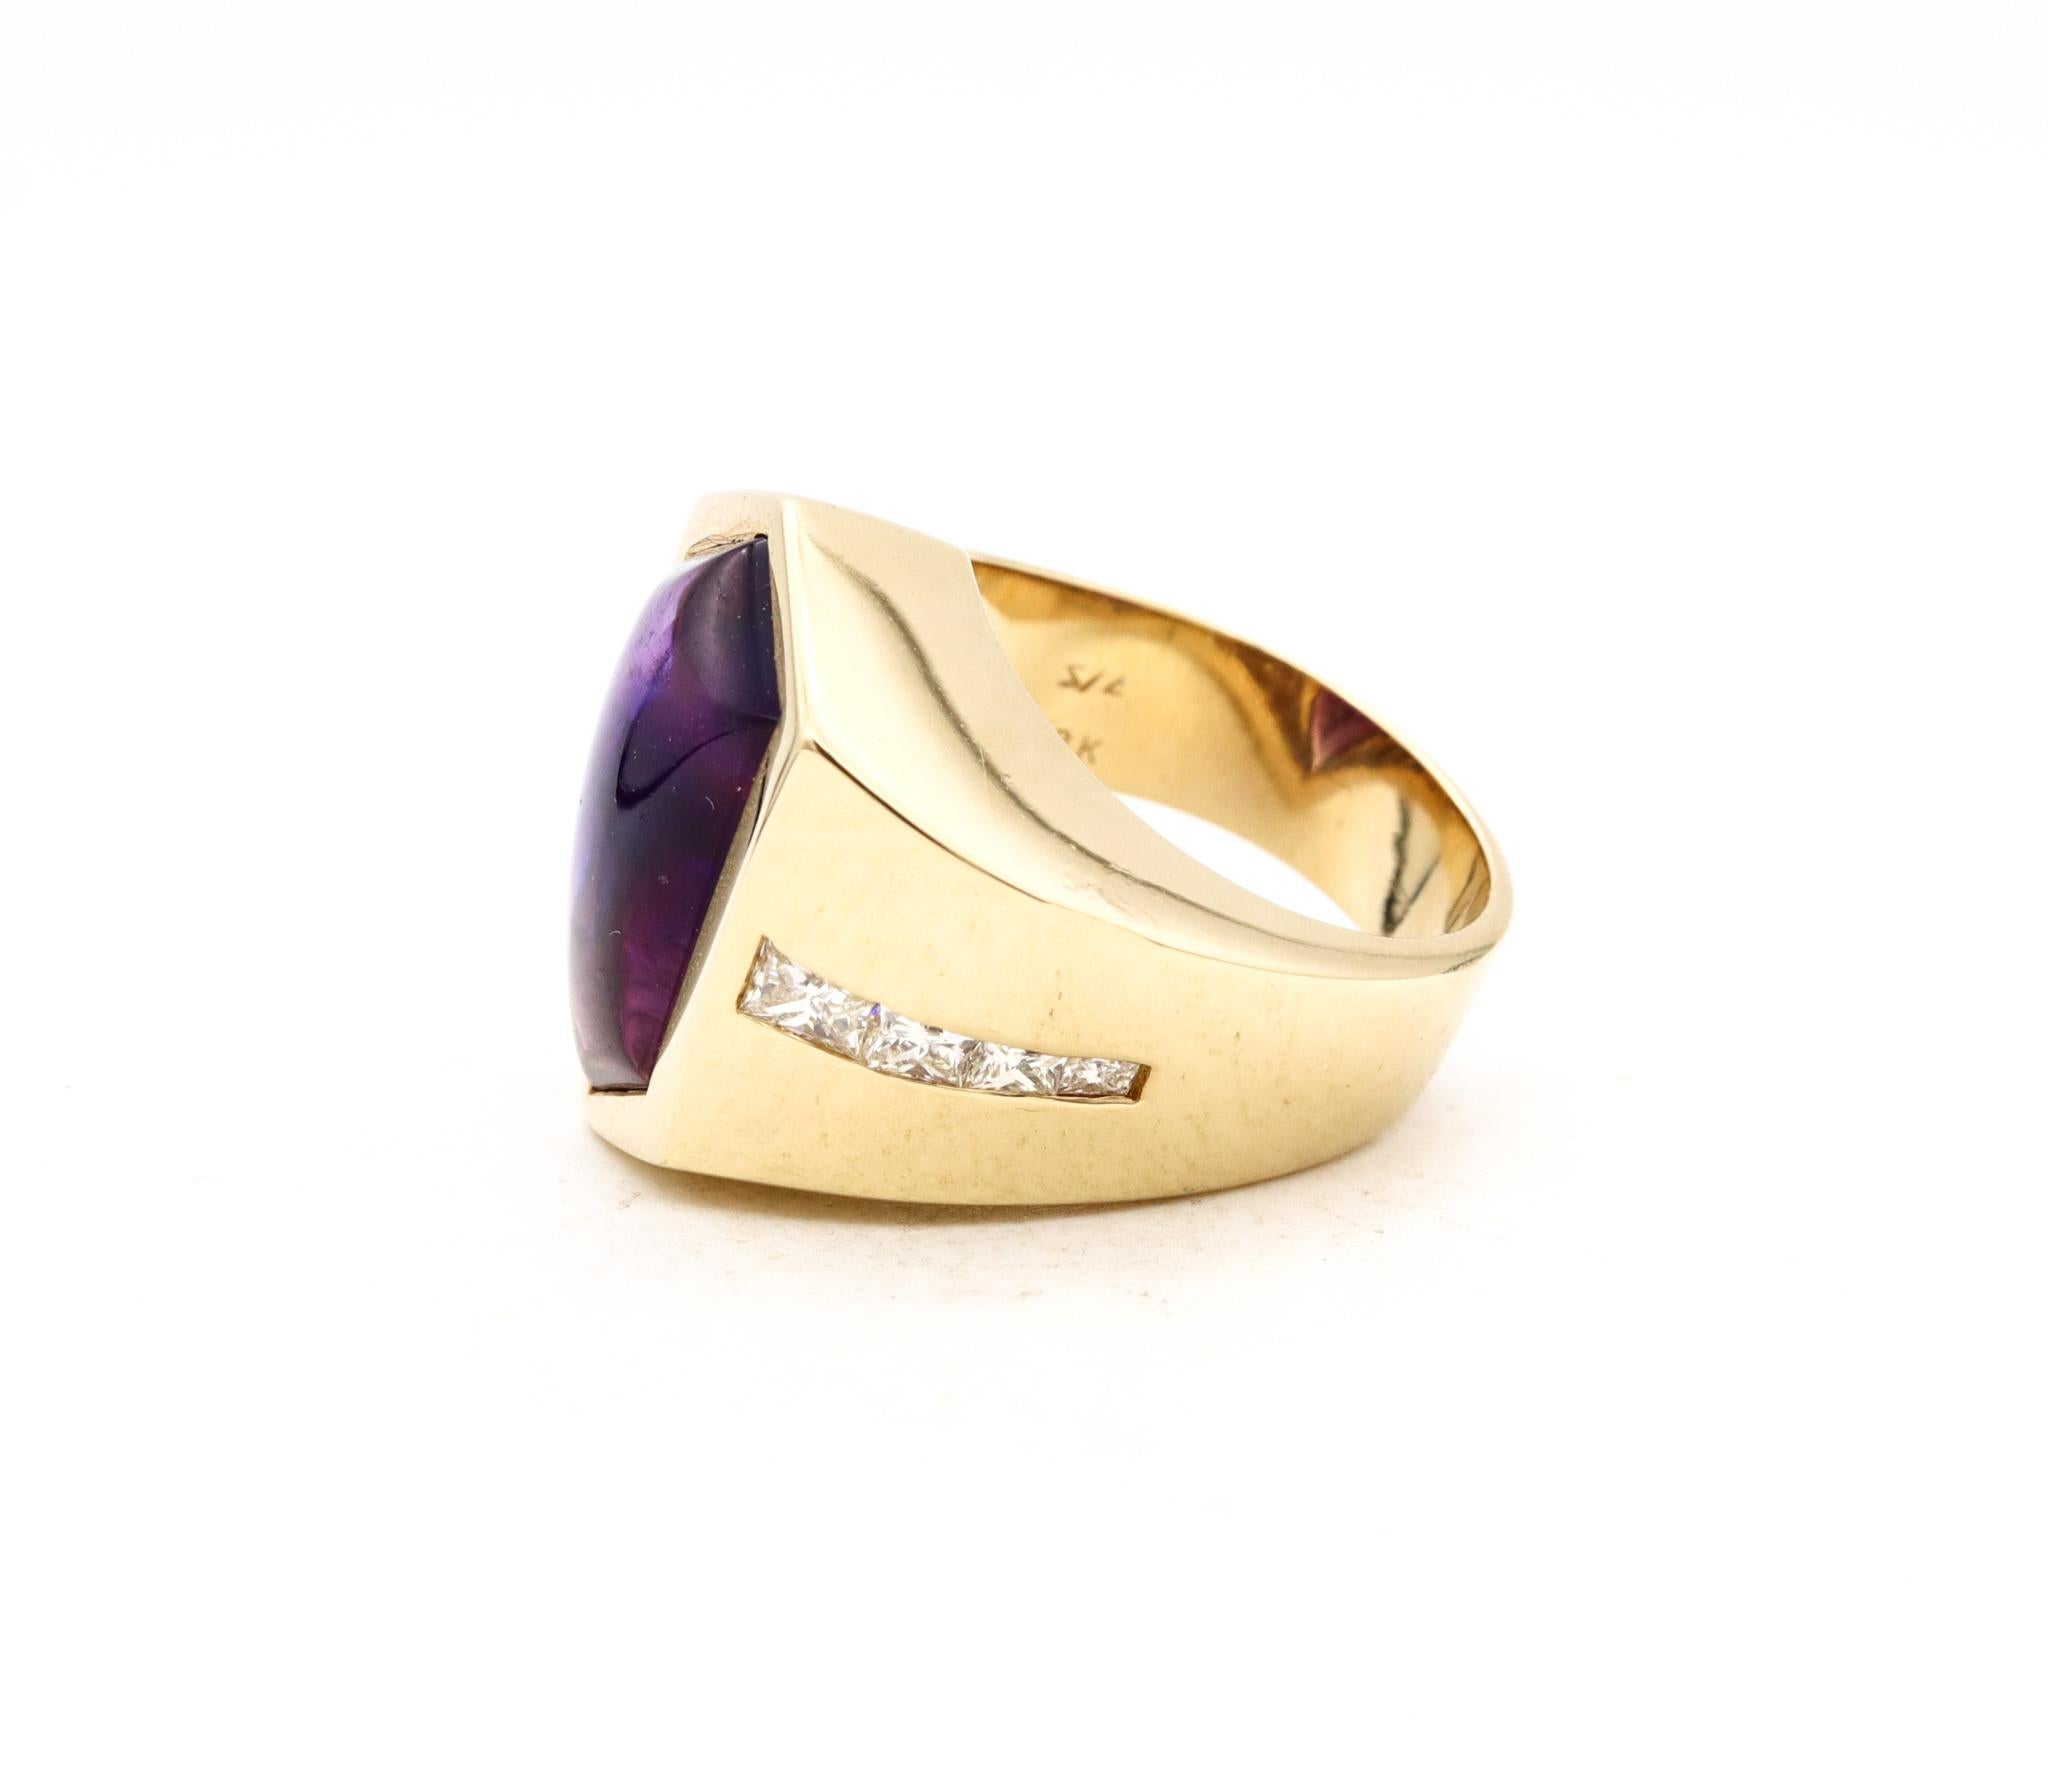 Modernist Asymmetric Ring in 18Kt Gold with 9.27 Cts in Diamonds and Amethyst For Sale 4